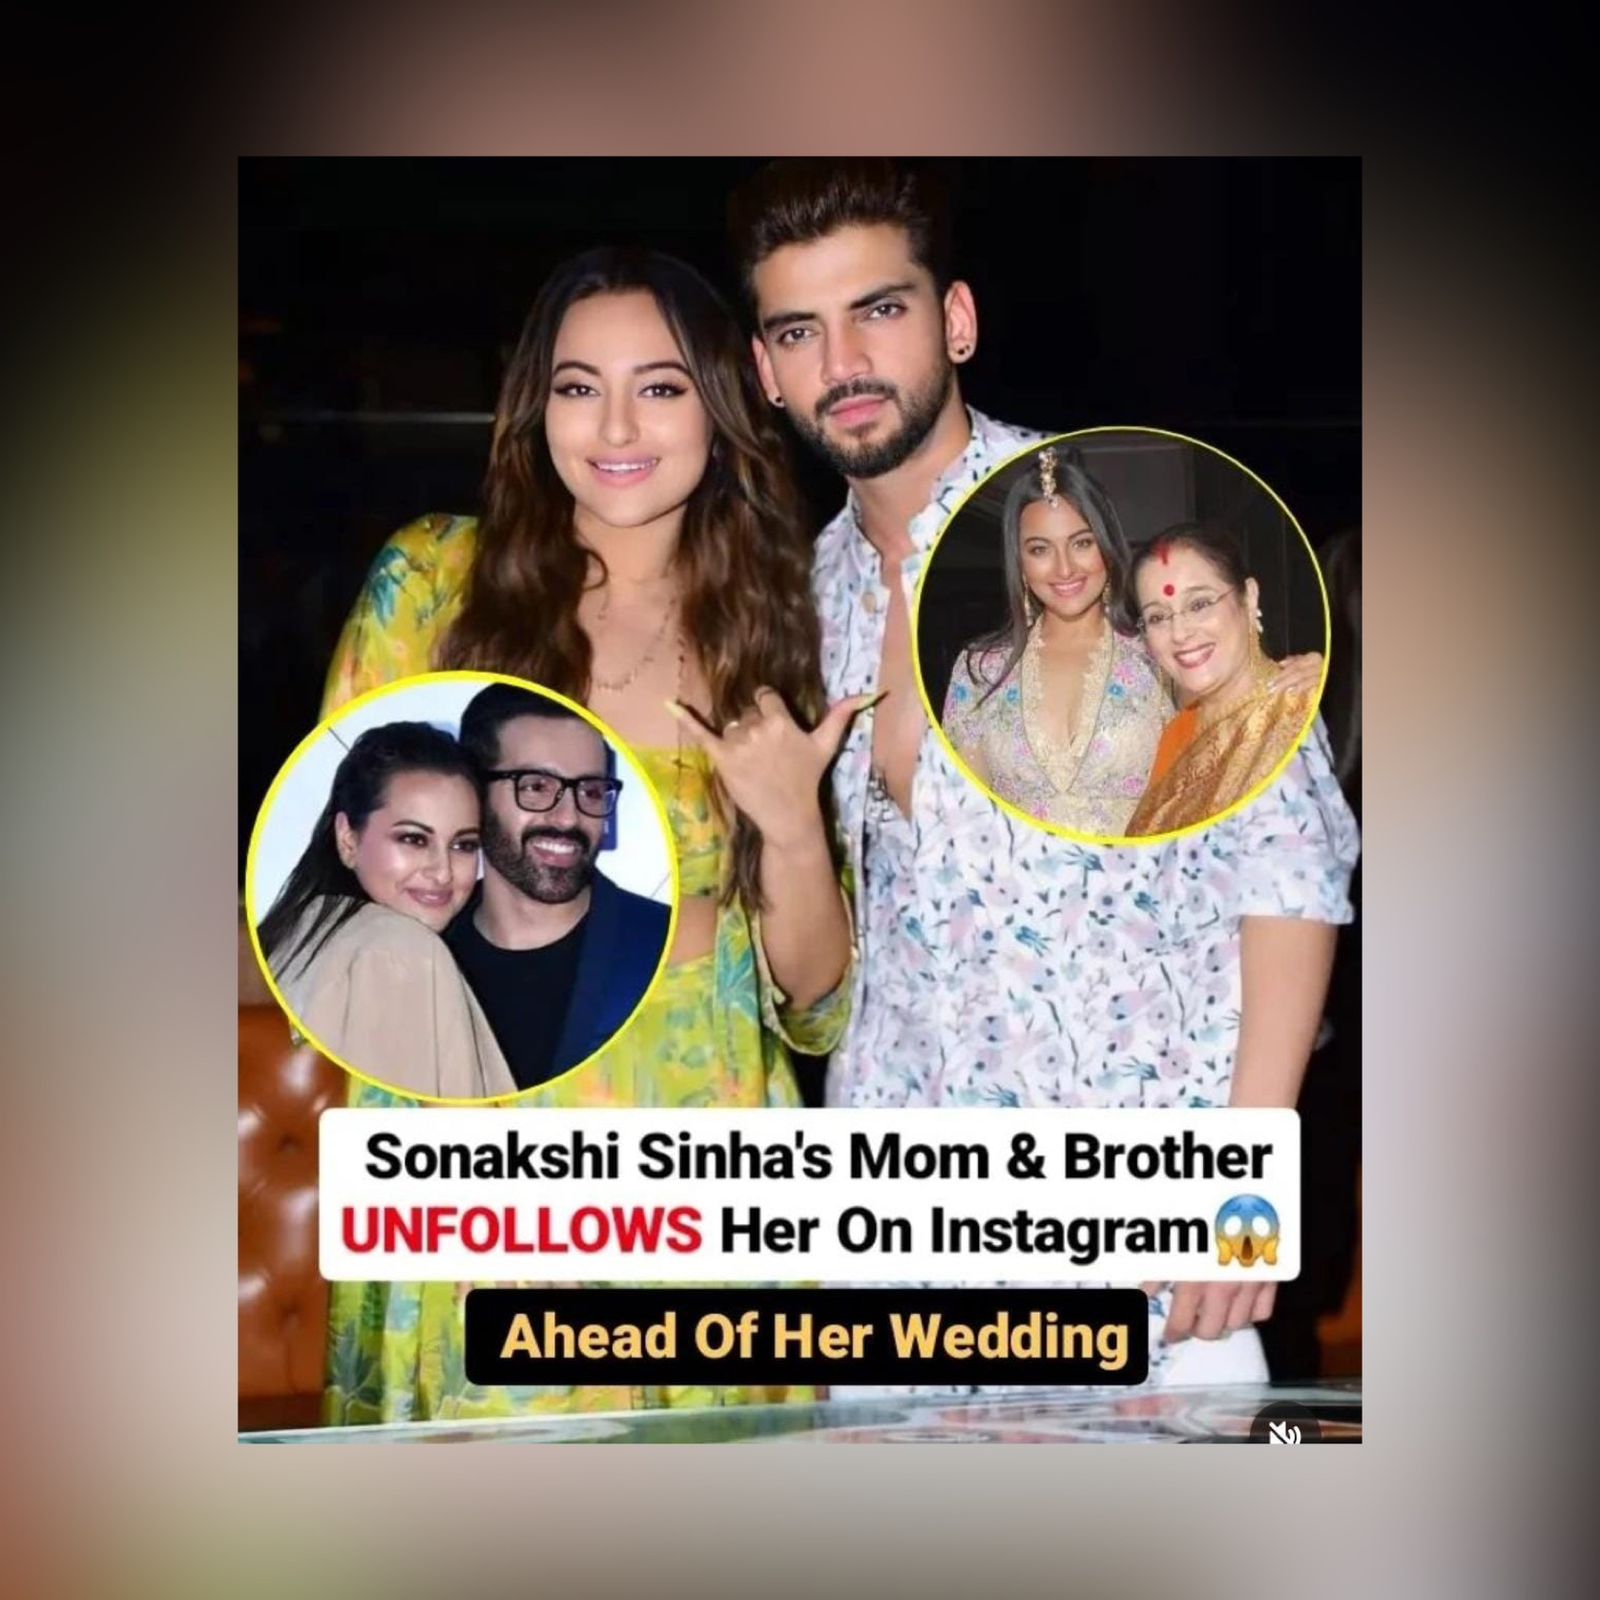 Sonakshi Sinha Mother And Brother Unfollow Her On Instagram